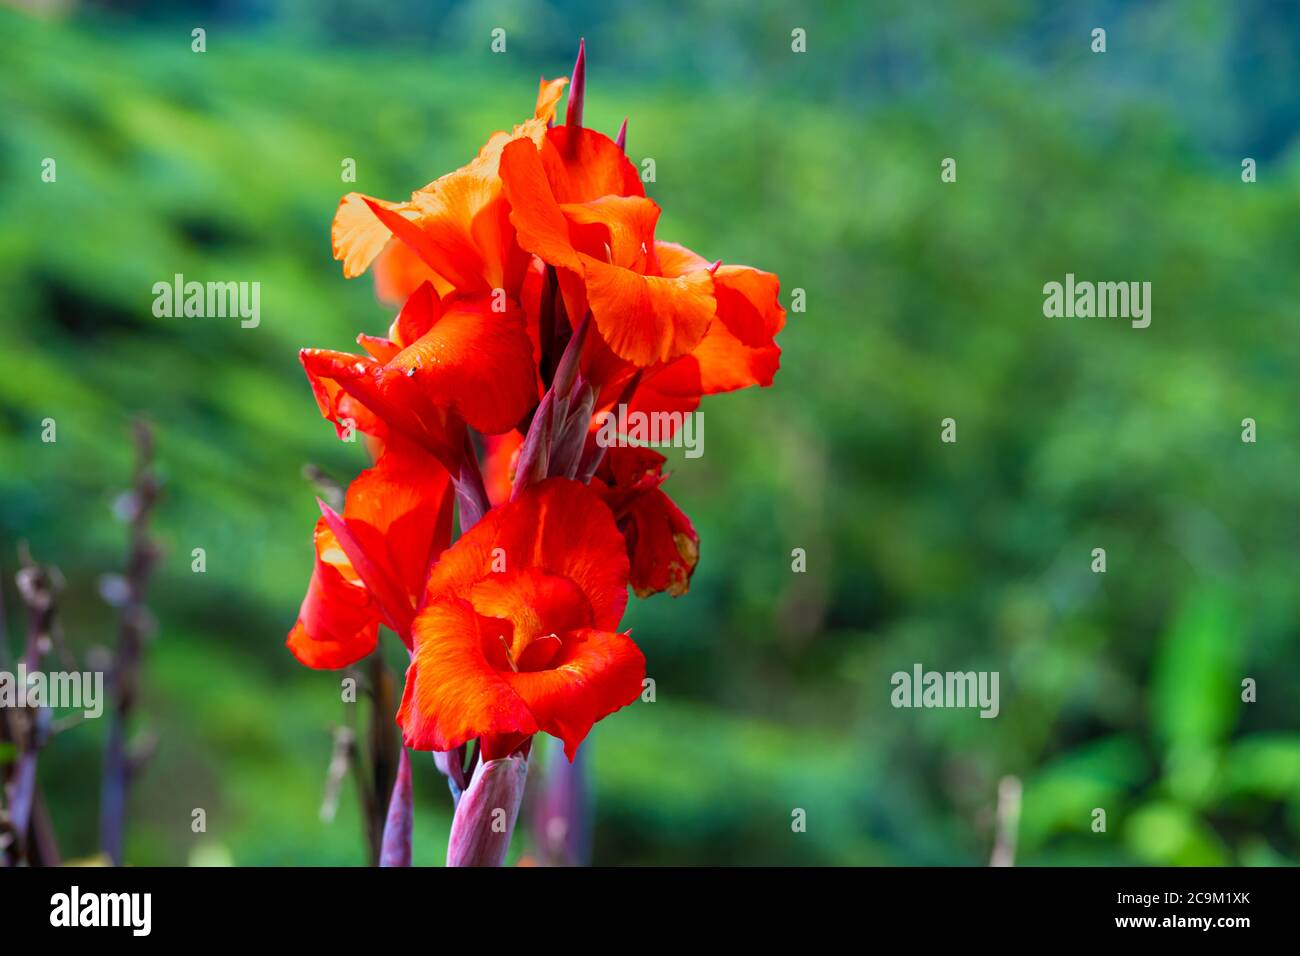 Blooming canna indica flower. Beautiful photograph of a red Canna flower. Scientific Name: Canna Assaut. Stock Photo